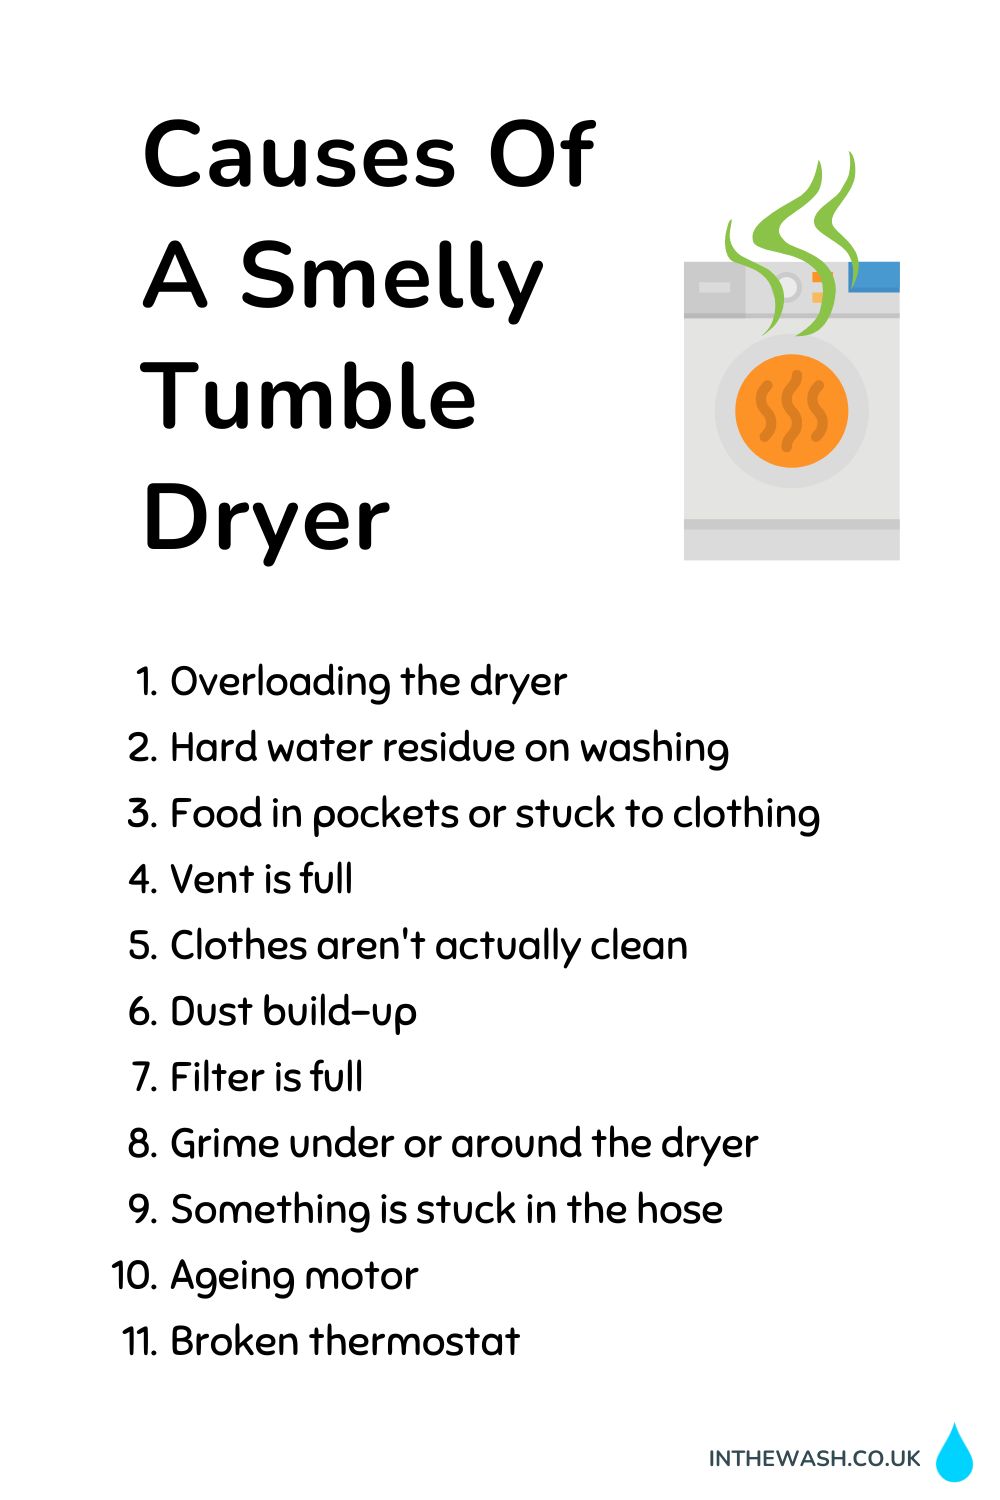 Causes of a smelly tumble dryer